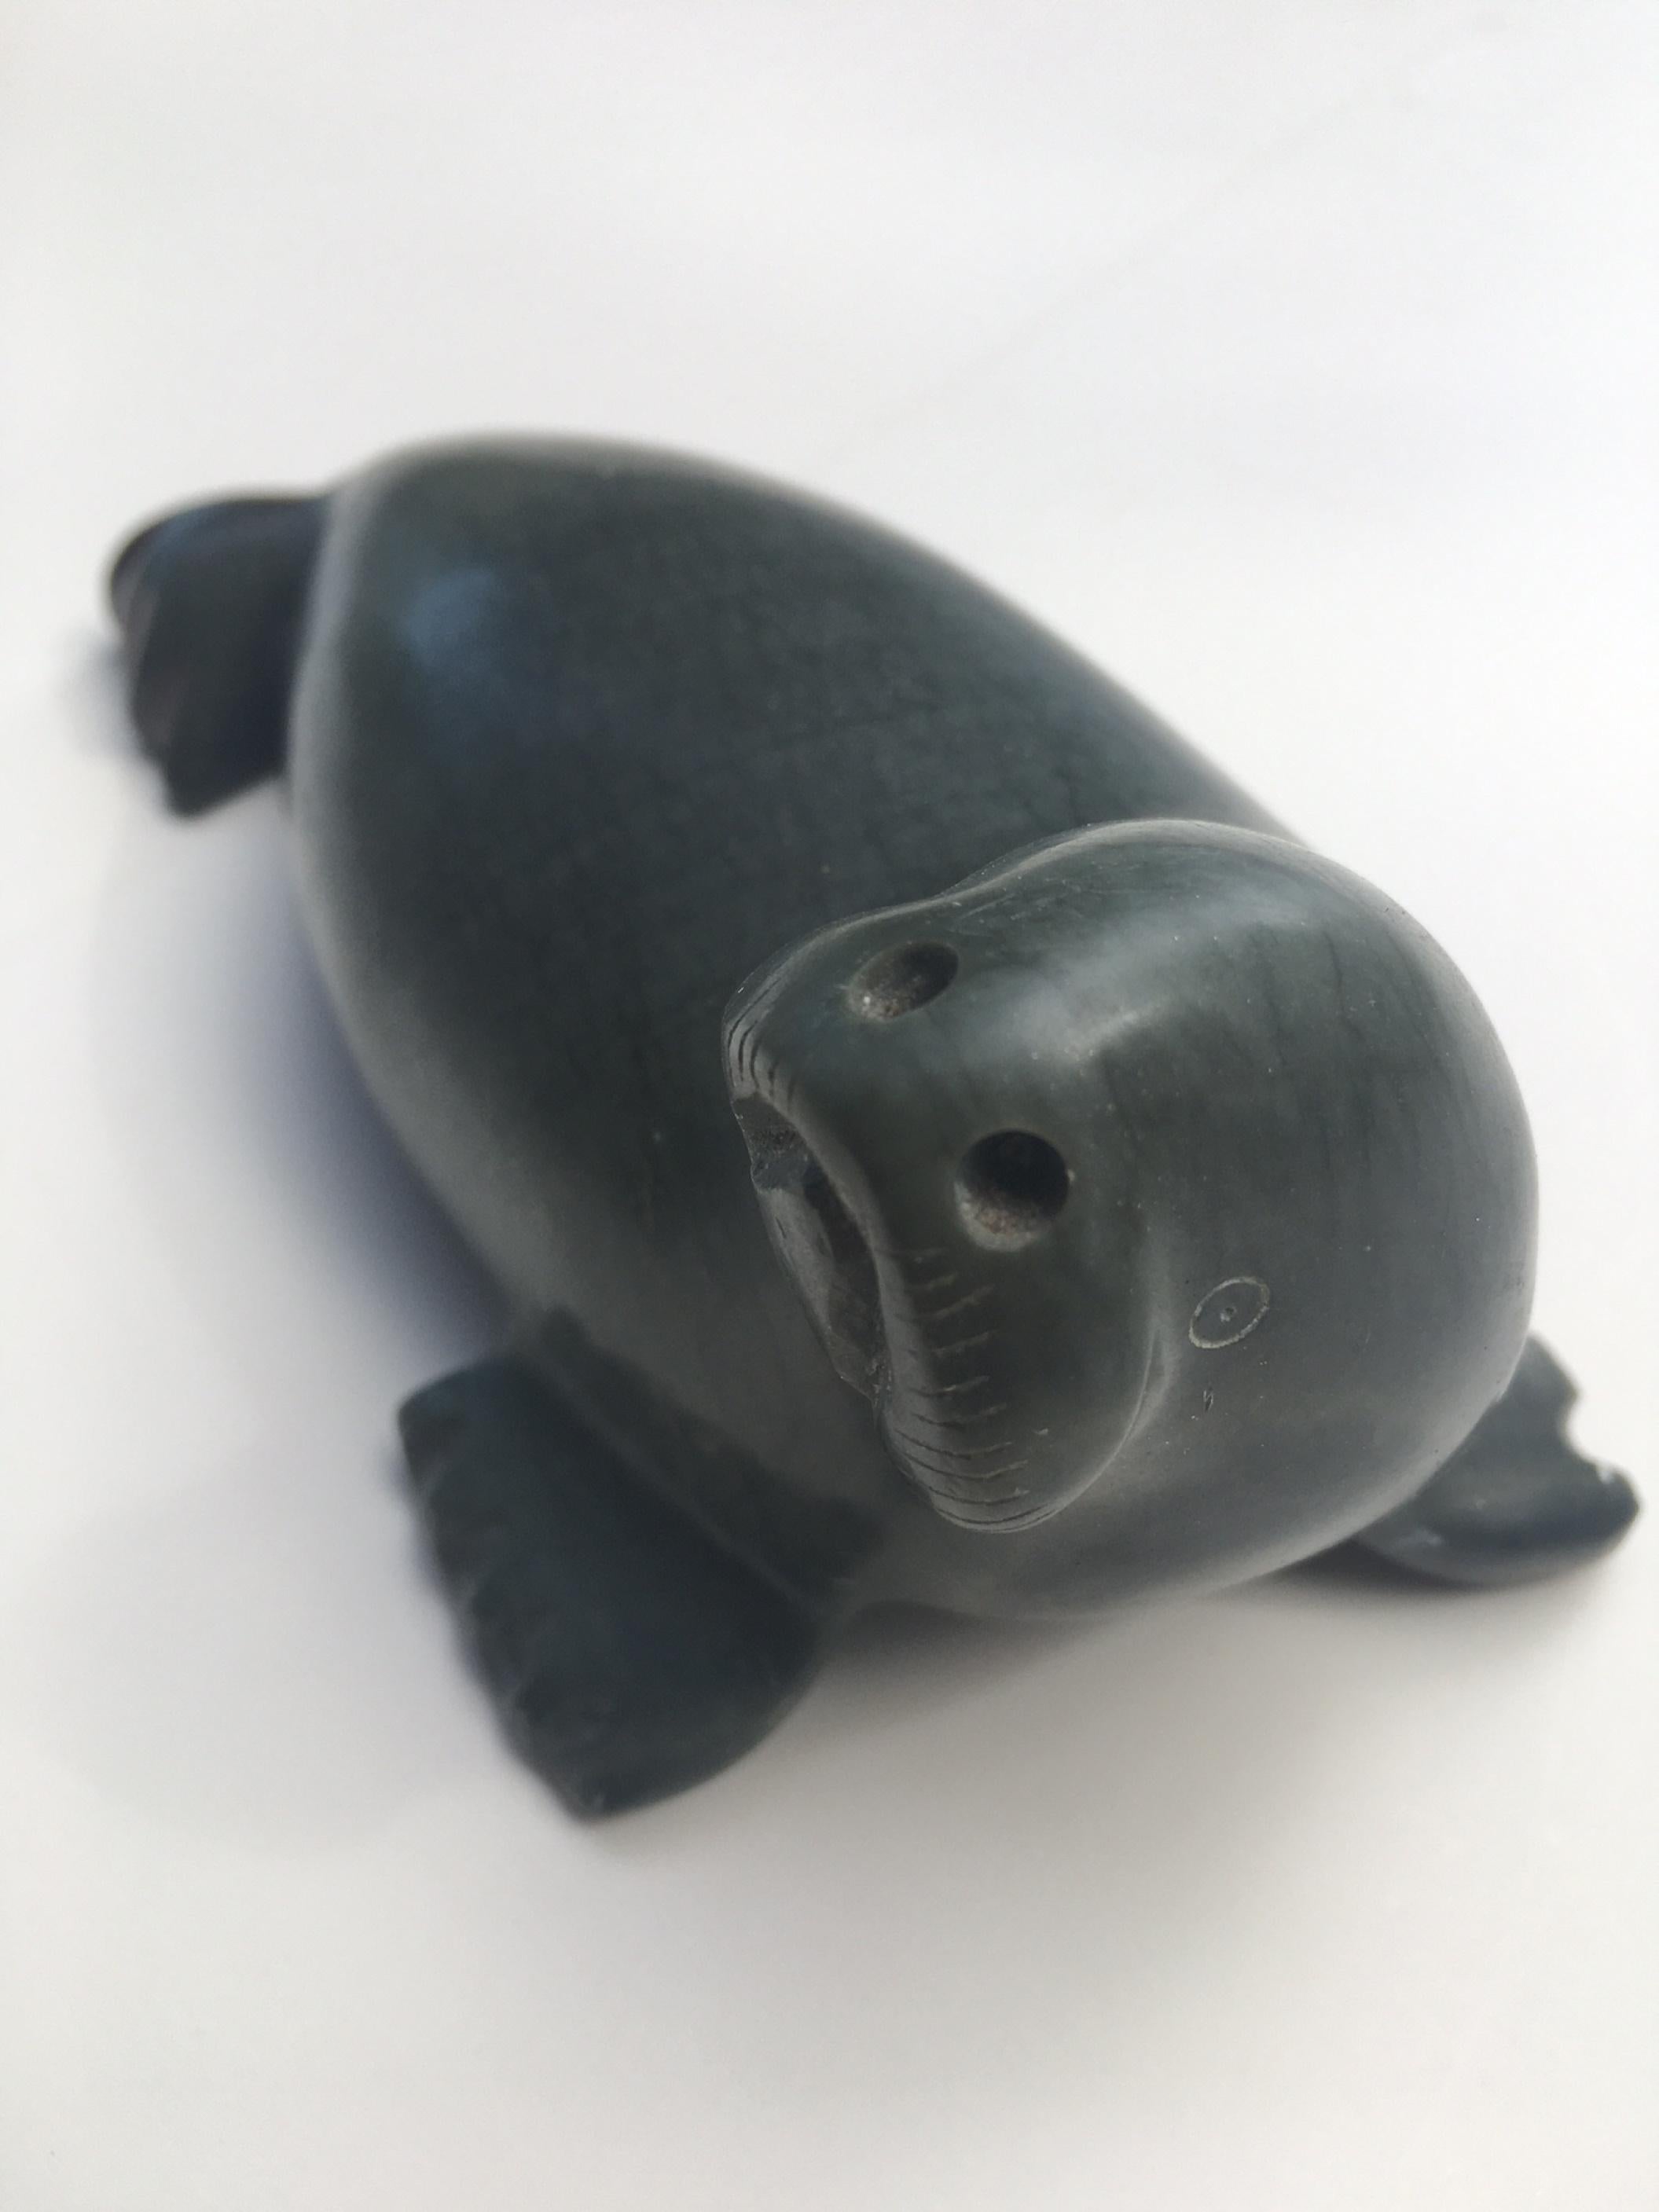 Canadian Inuit Stone Seal Sculpture Carving by Pauta Saila 1916 - 2009